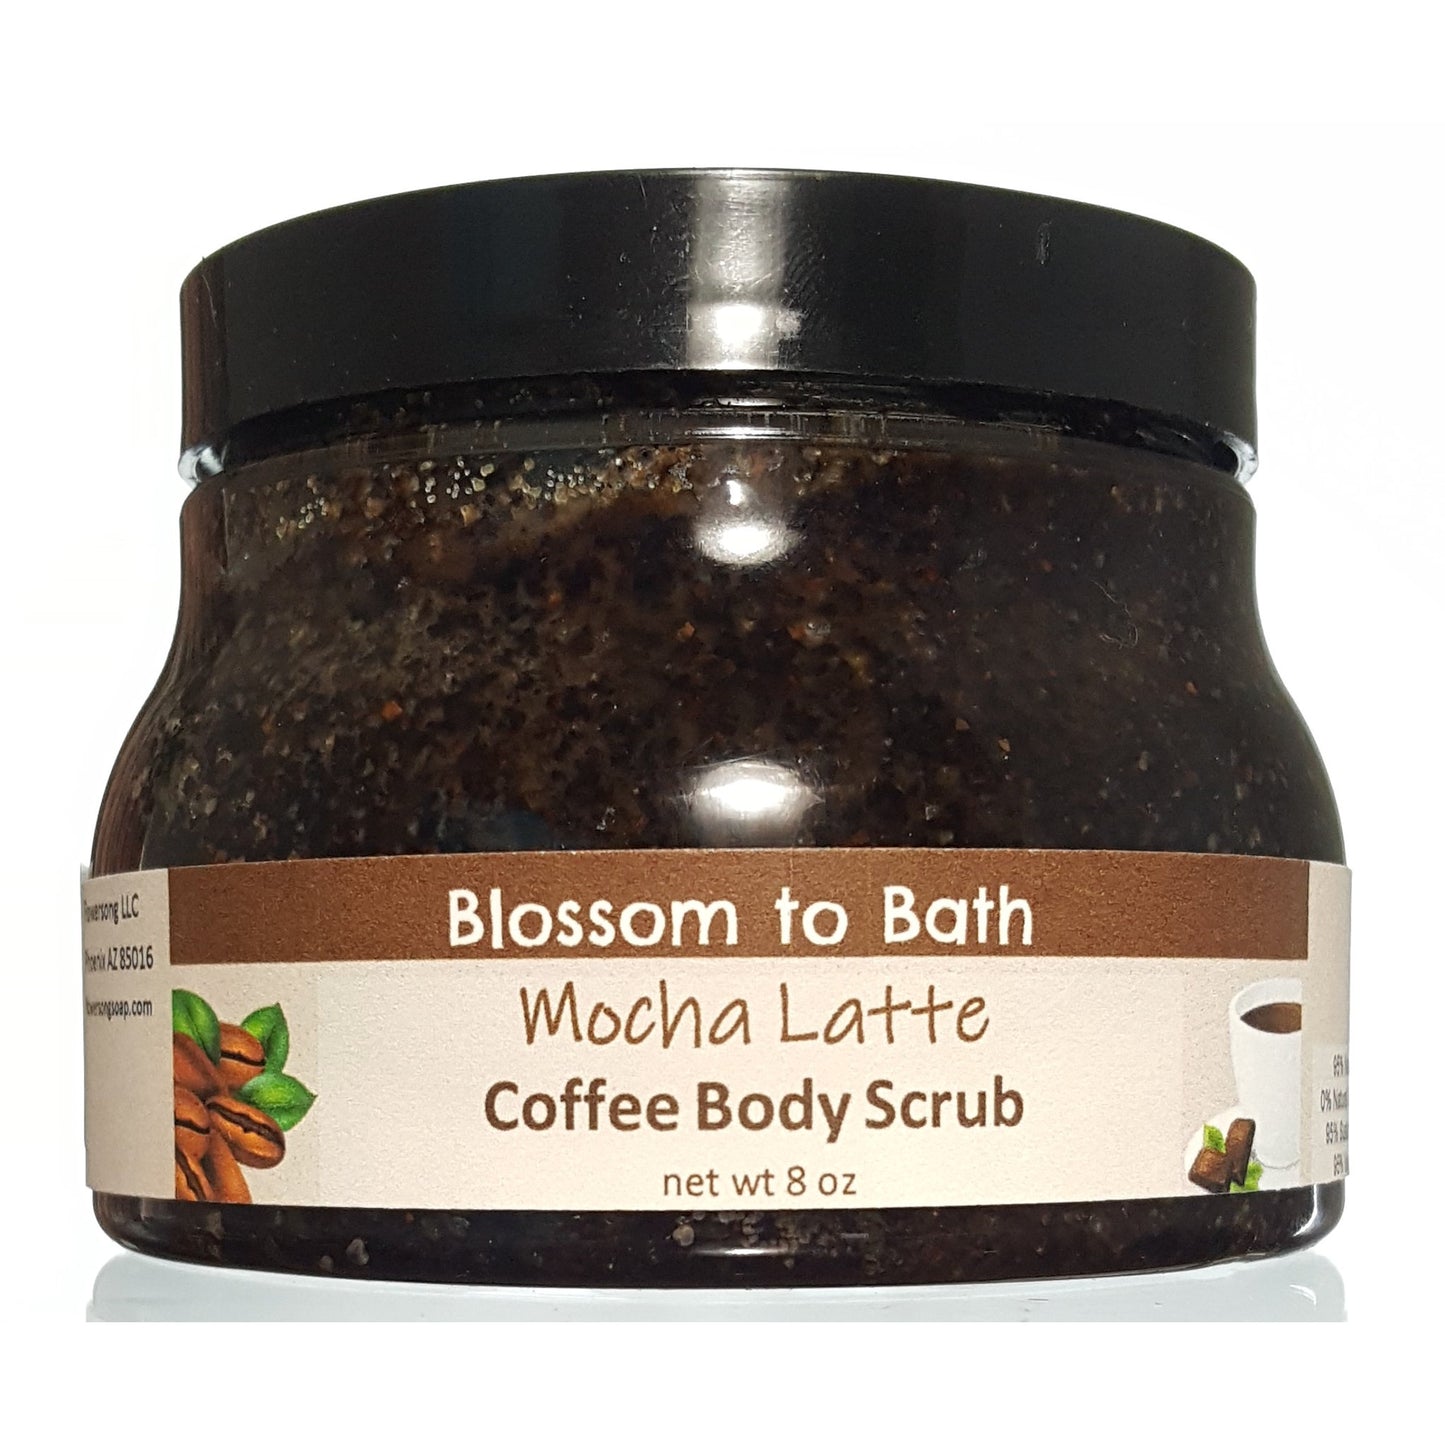 Buy Blossom to Bath Mocha Latte Coffee Body Scrub from Flowersong Soap Studio.  Polish skin to a refreshed natural glow while enjoying your favorite mouth-watering gourmet coffee aroma  Deep rich chocolate and fragrant coffee combine to form this gourmet coffee smell-alike scent.